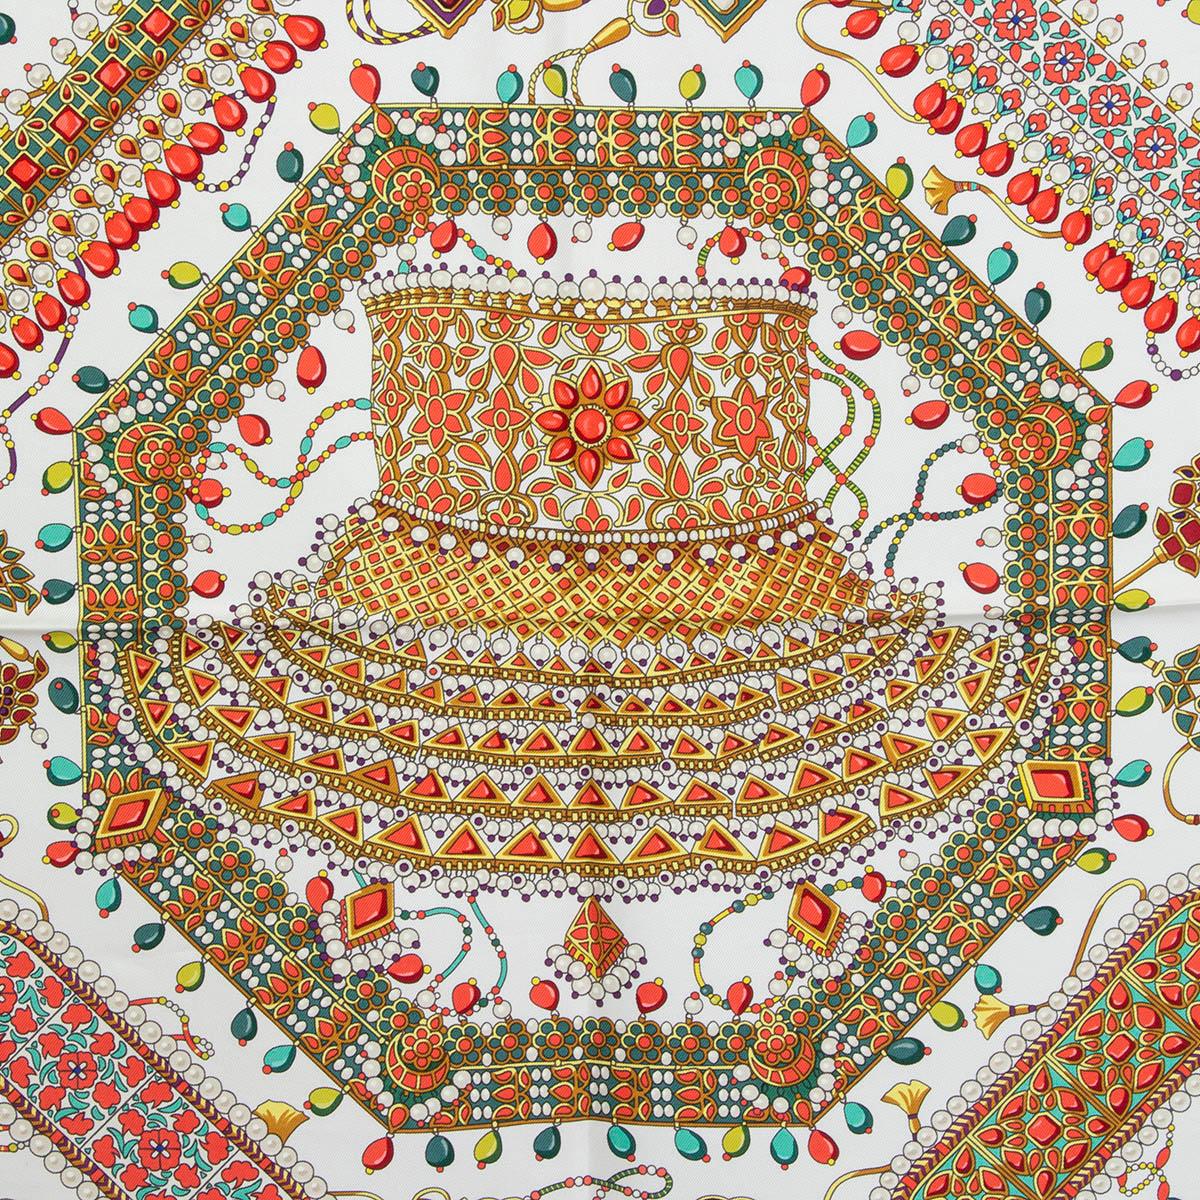 100% authentic Hermes 'Parures des Maharajas 90' scarf by Catherine Baschet in Blanc (white)  silk twill (100%) with contrasting Corail (coral) hem and details in dark and lime green, red, burgundy and purple. Has been worn and is in virtually new